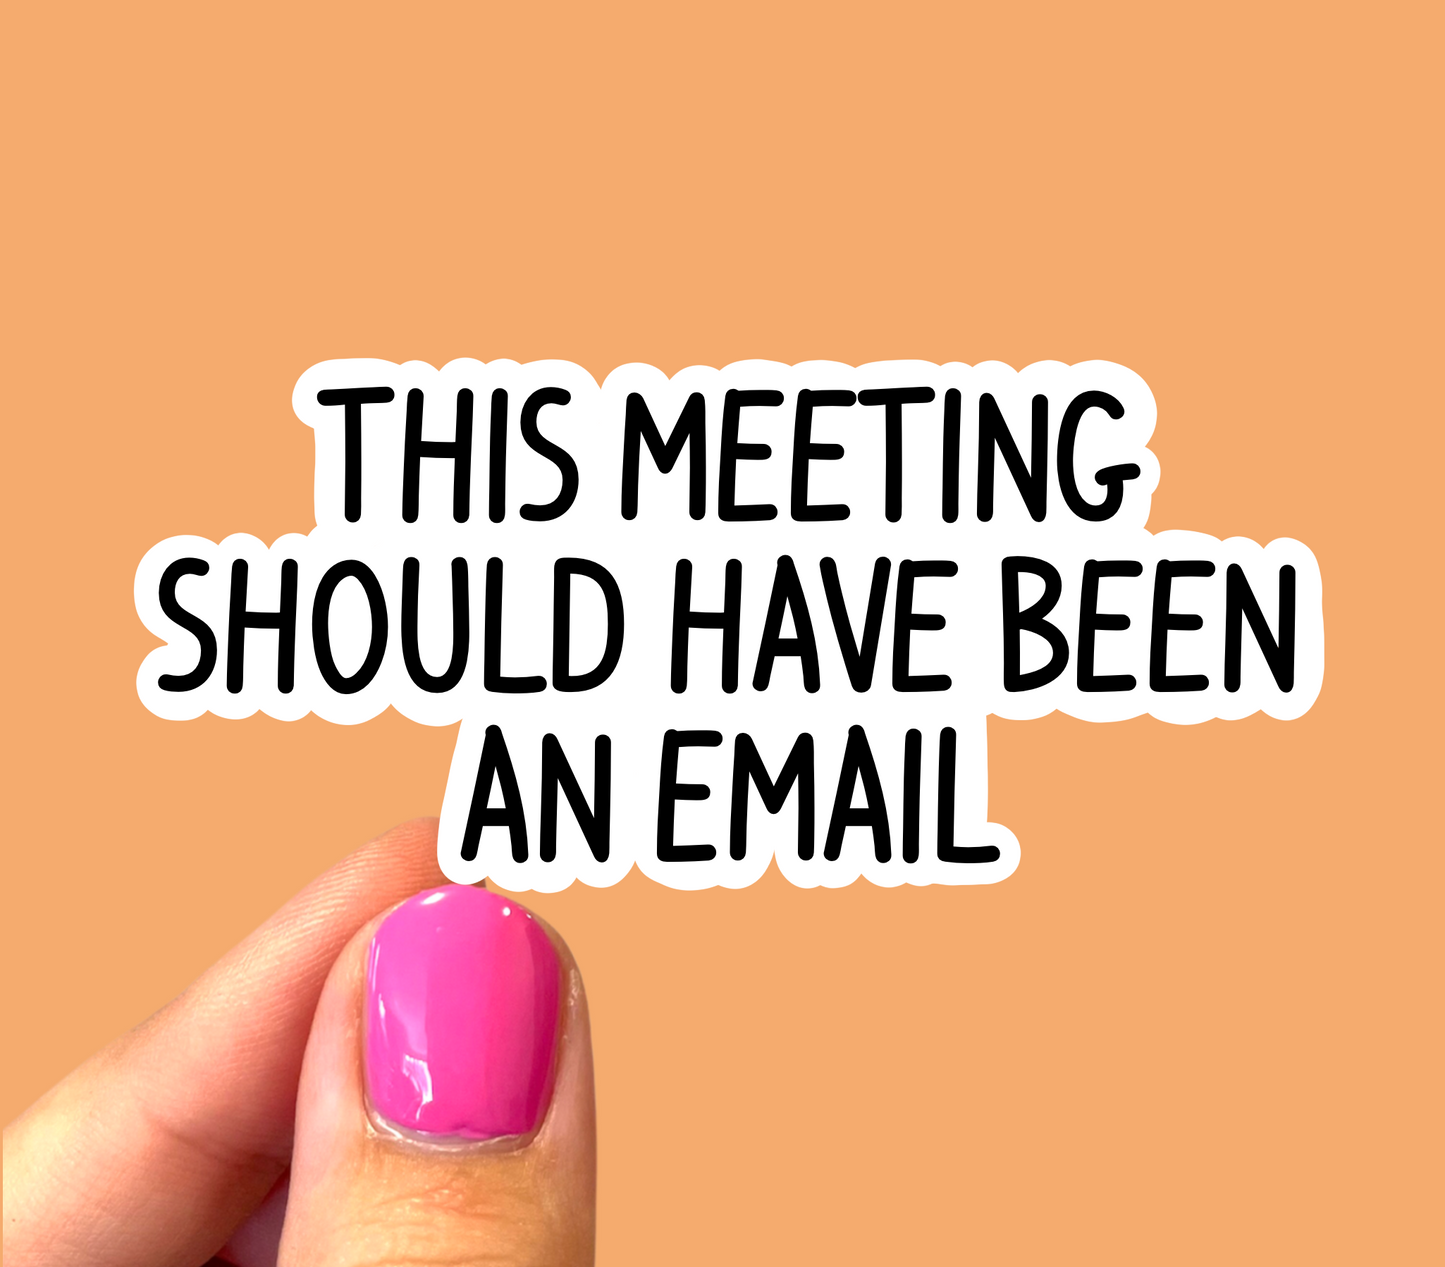 This meeting should have been an email sticker